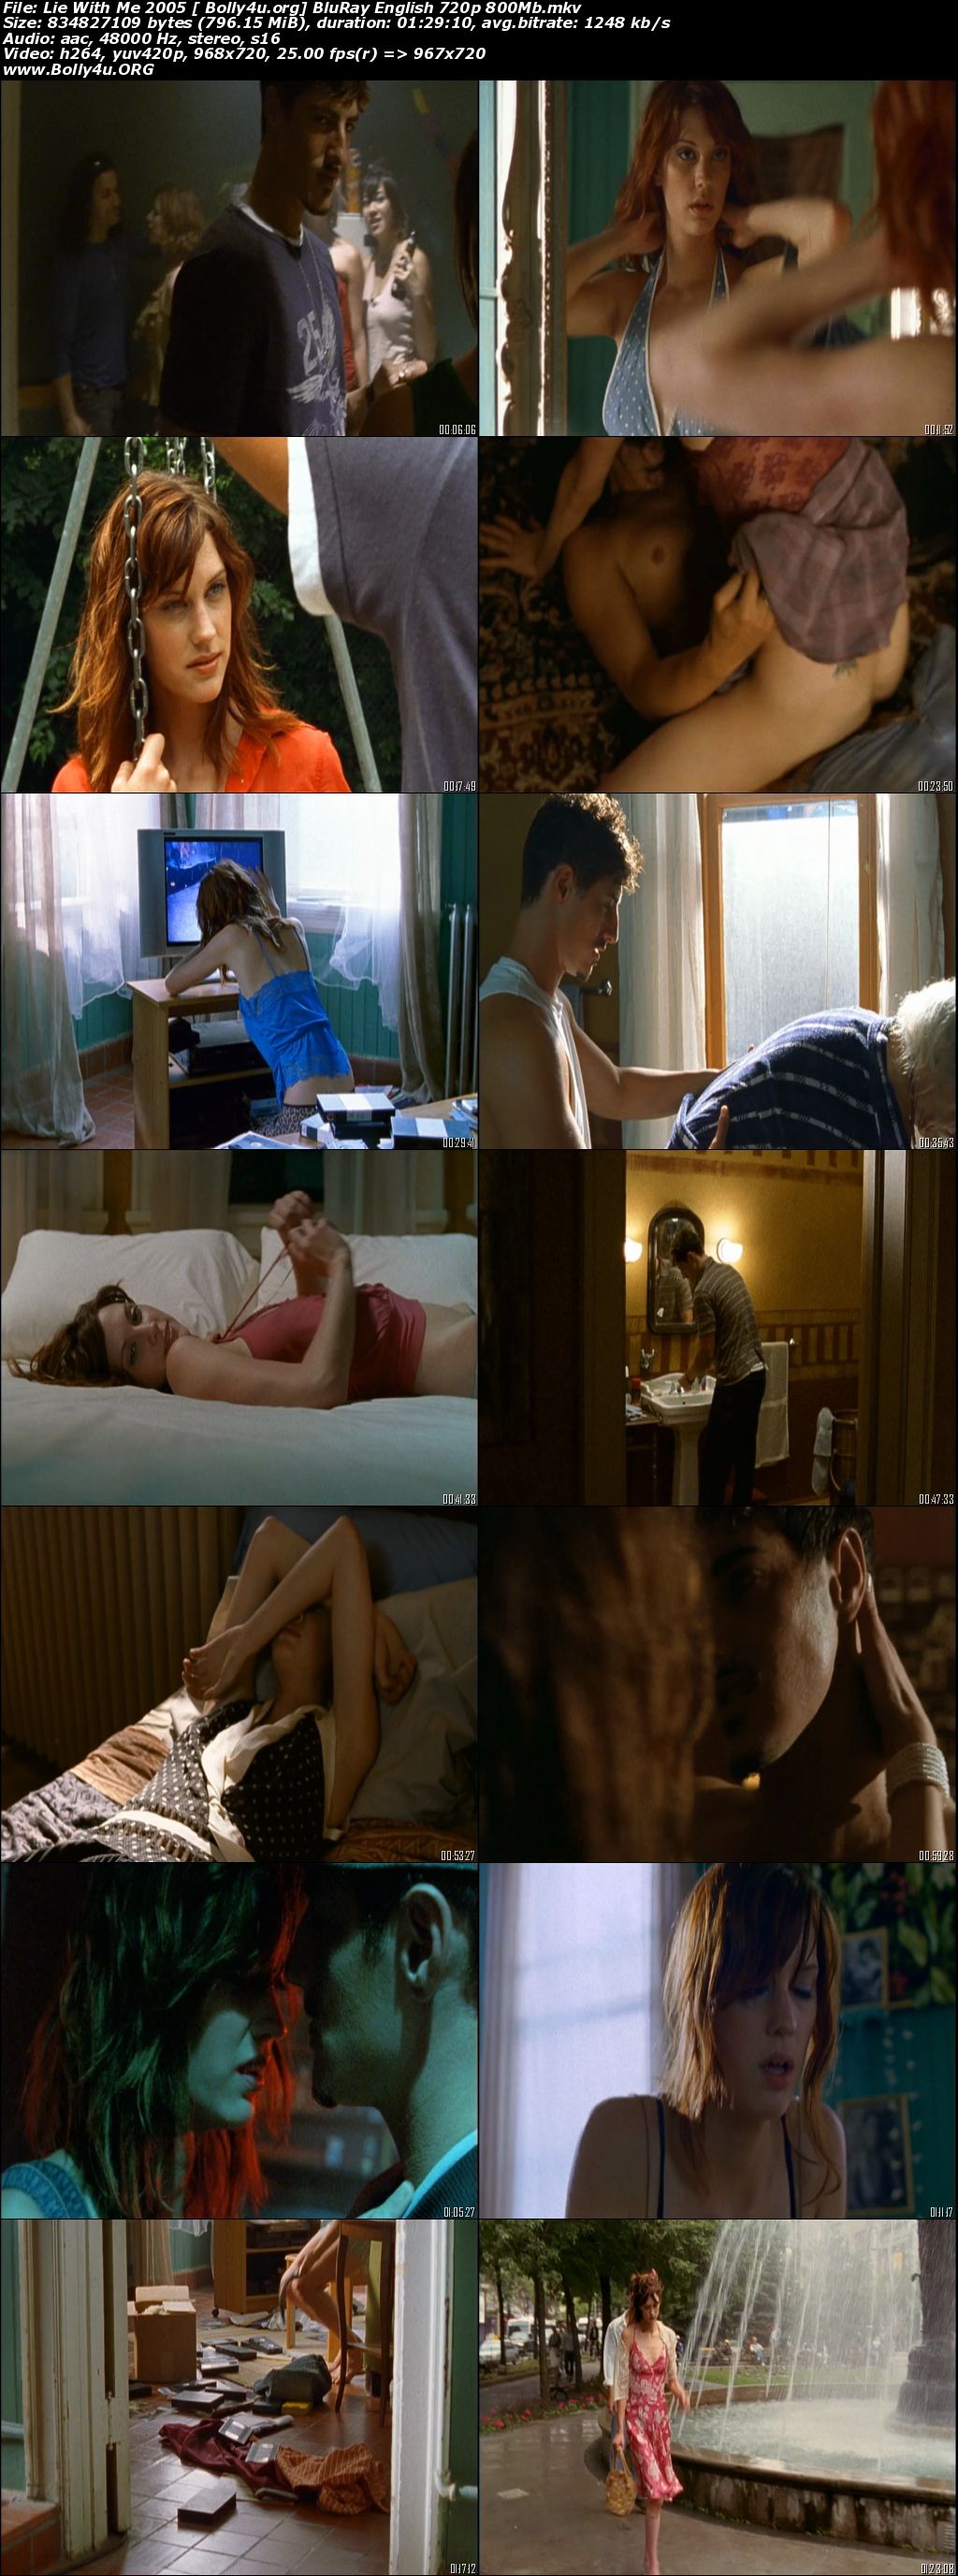 18+ Lie With Me 2005 BluRay 800Mb English 720p Download